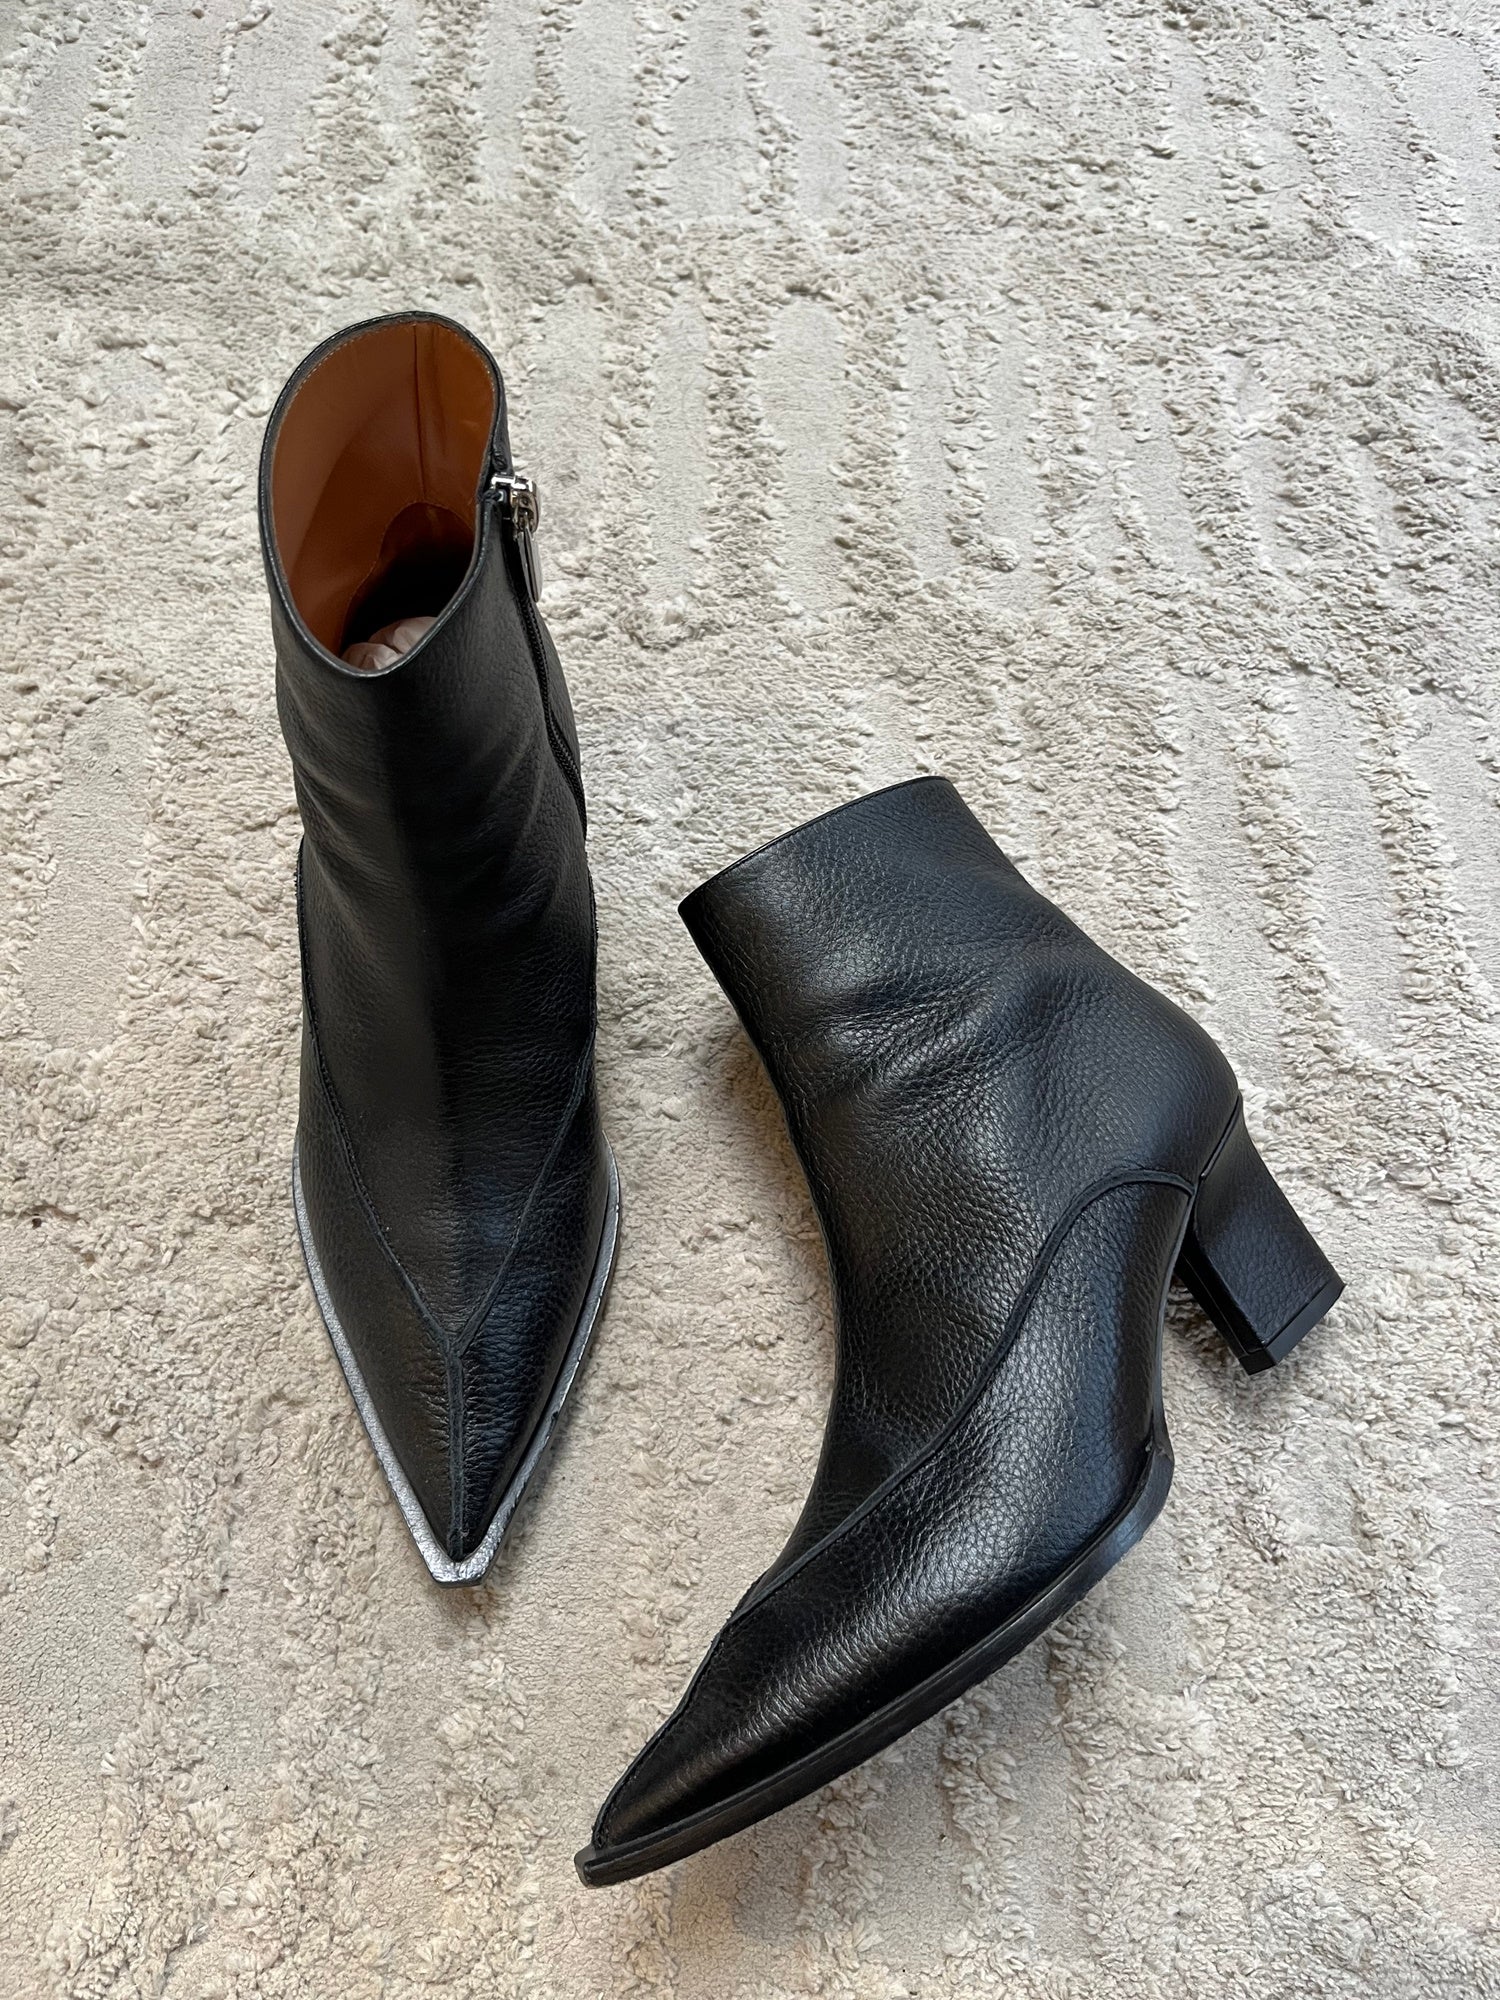 Pointed Toe Bootie Size 37.5 (Runs small)